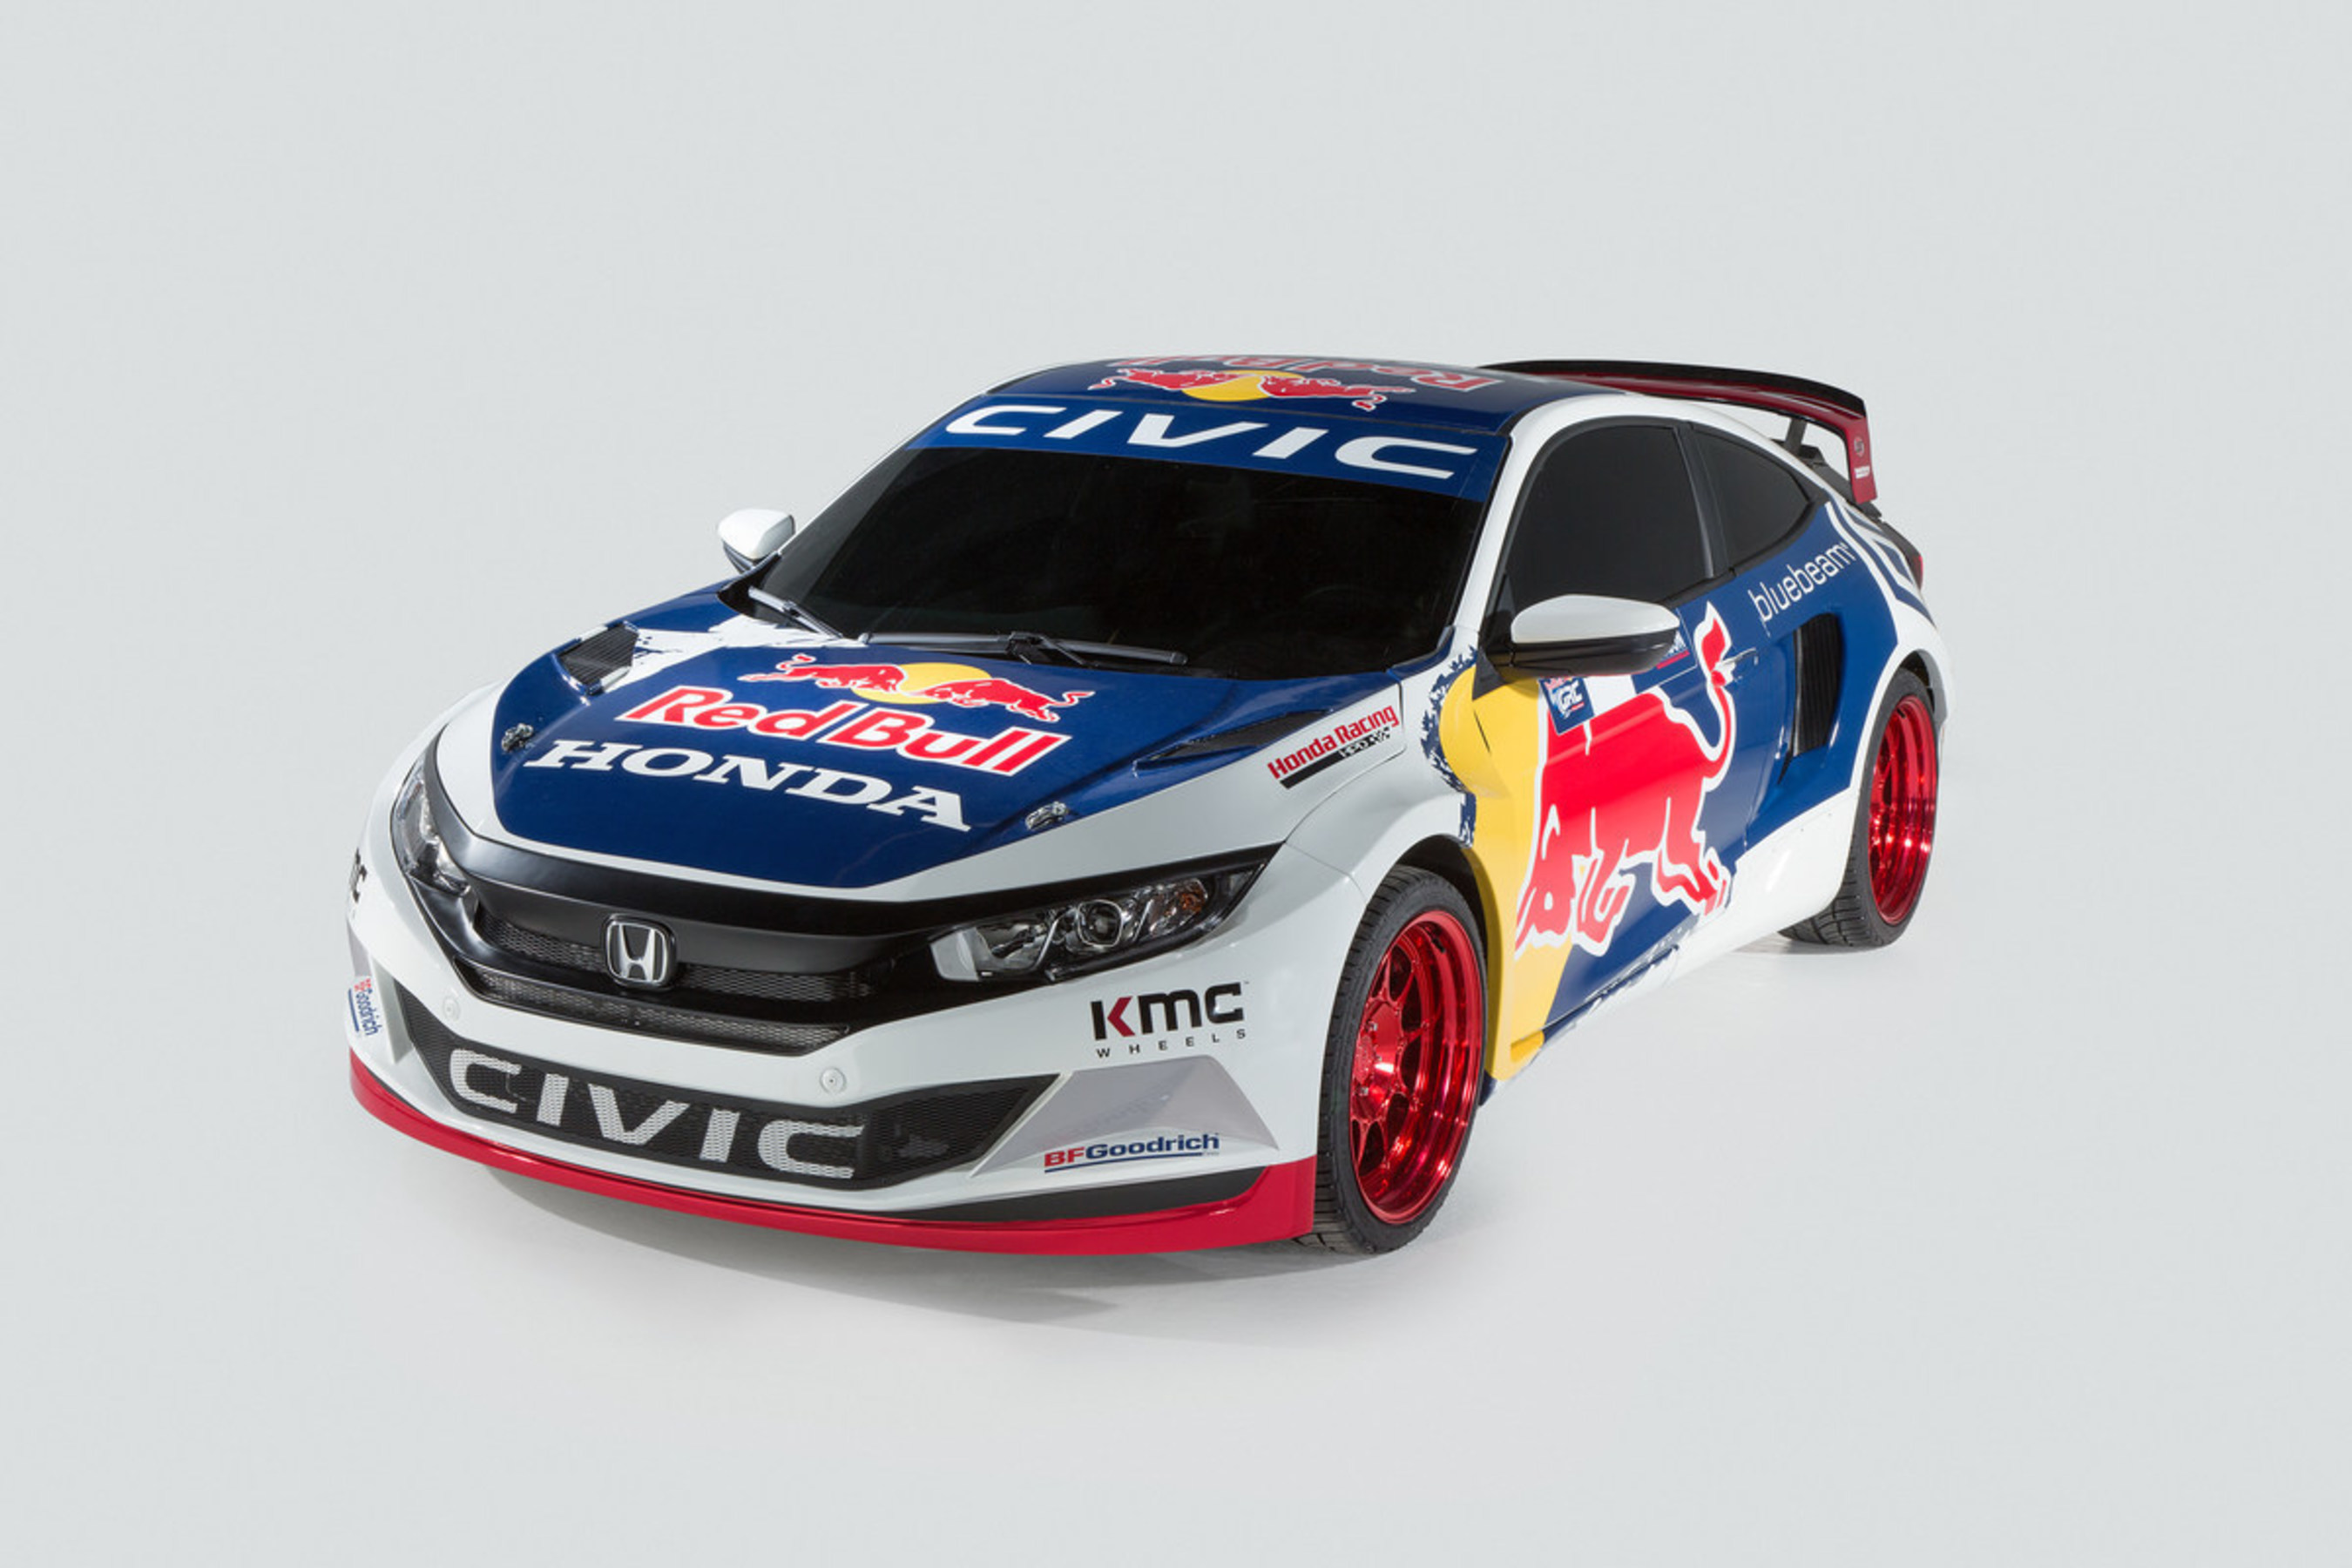 Debut of racing livery for new Civic Coupe Red Bull Global Rallcross racecar in New York